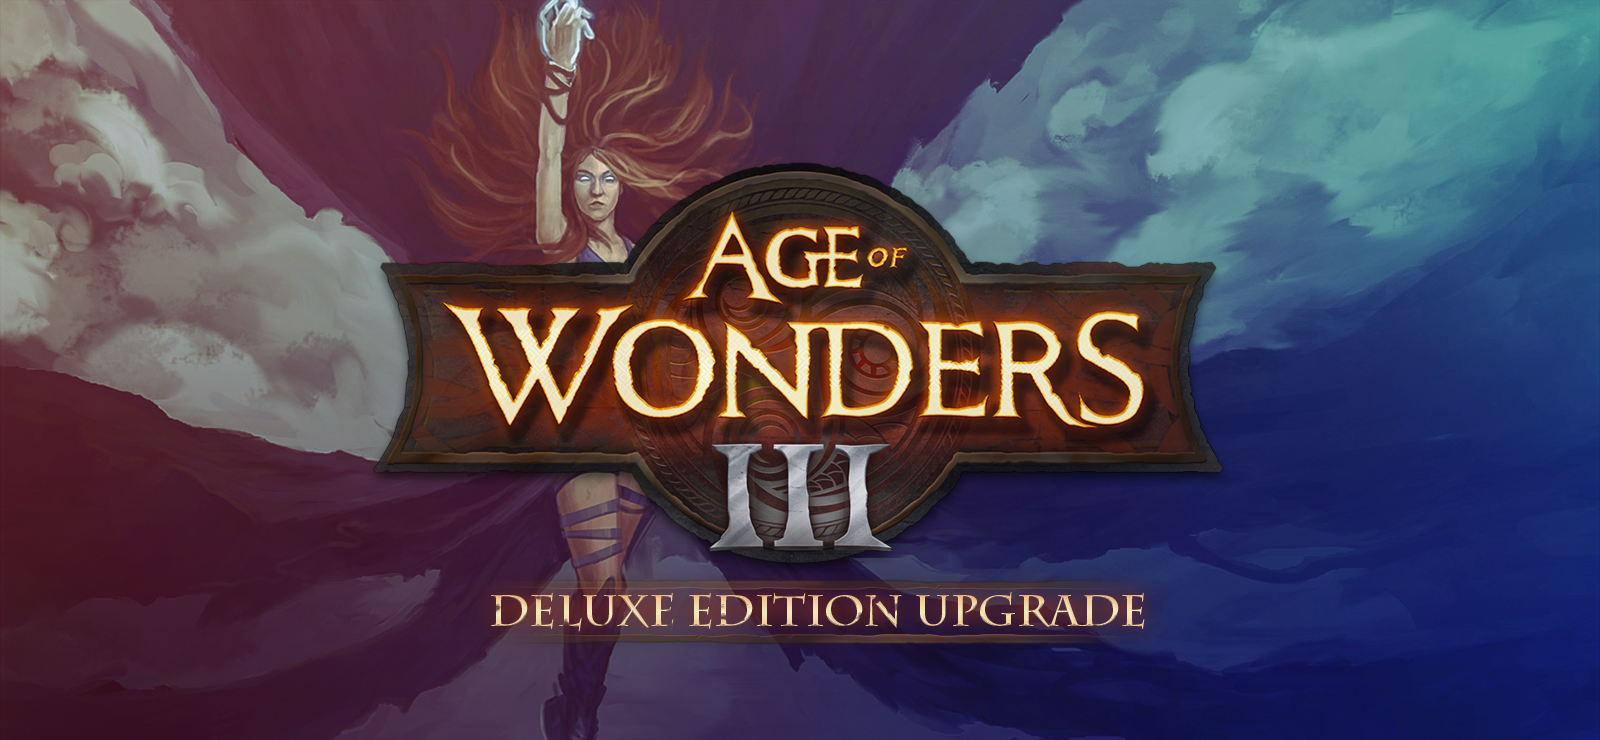 Age Of Wonders 3 - Deluxe Edition Upgrade